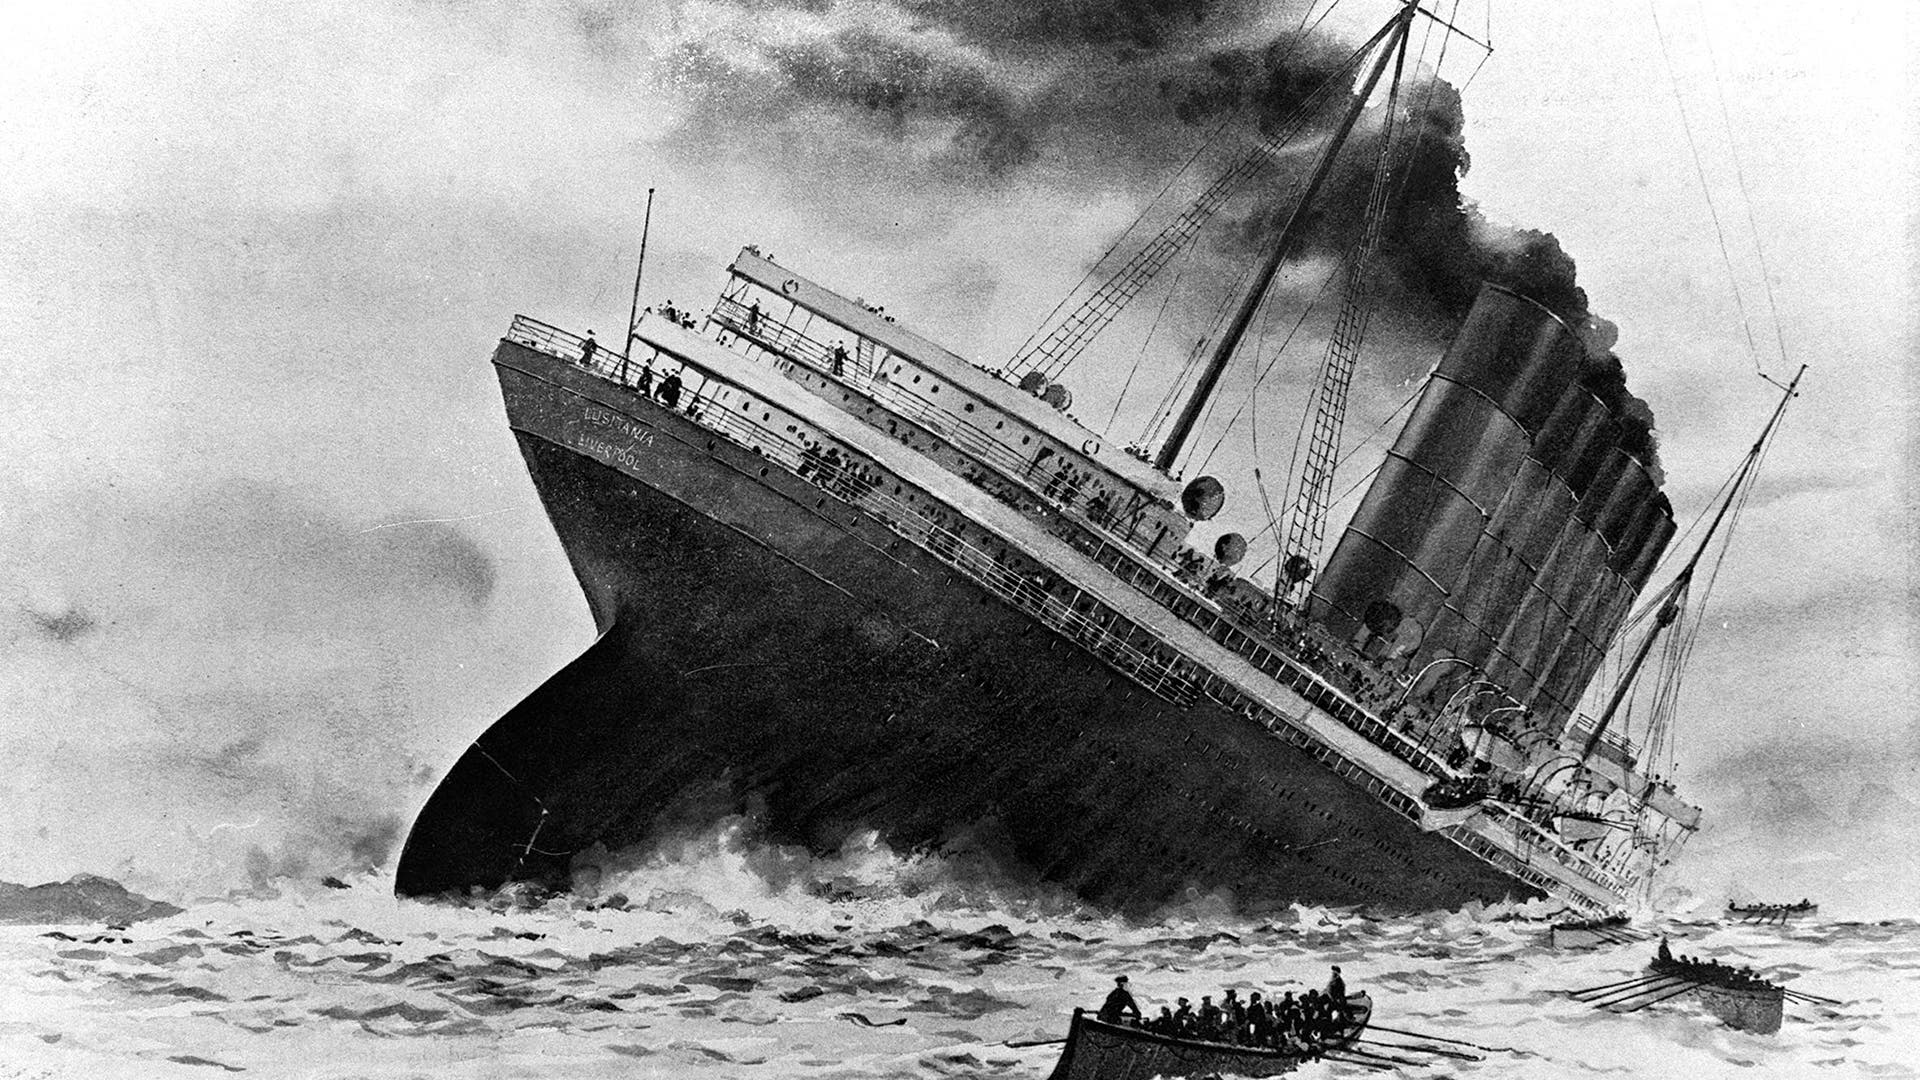 An illustration of the sinking of the British ocean liner RMS Lusitania, torpedoed by German U-boat U-20 off the old head of Kinsale, Ireland.